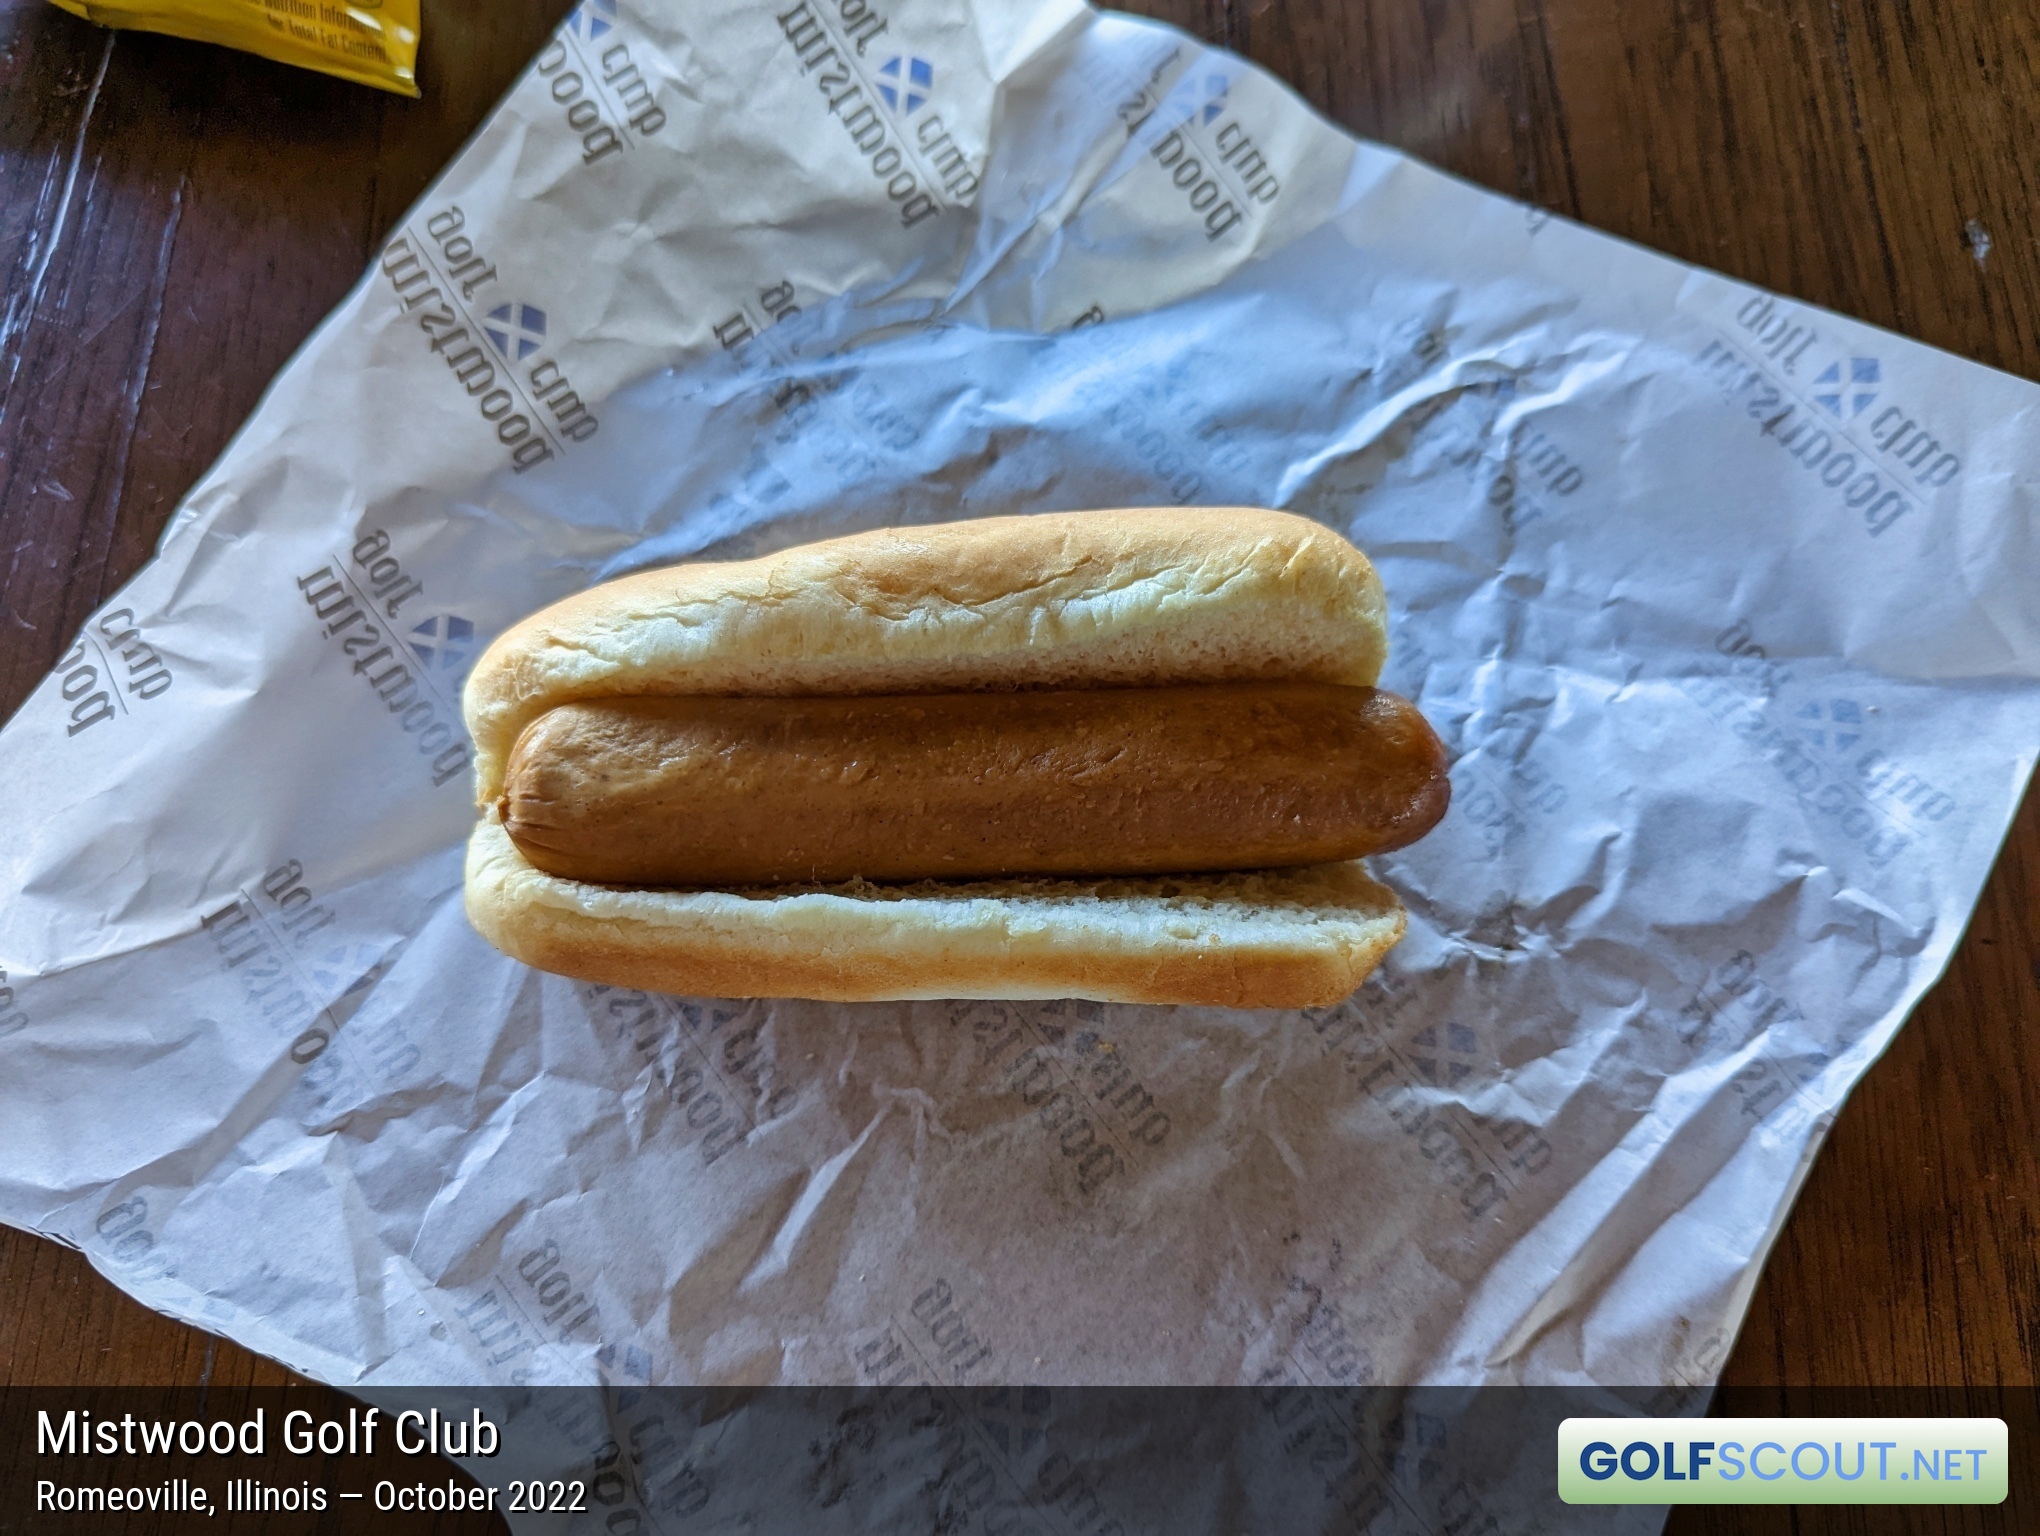 Photo of the food and dining at Mistwood Golf Club in Romeoville, Illinois. Photo of the hot dog at Mistwood Golf Club in Romeoville, Illinois.